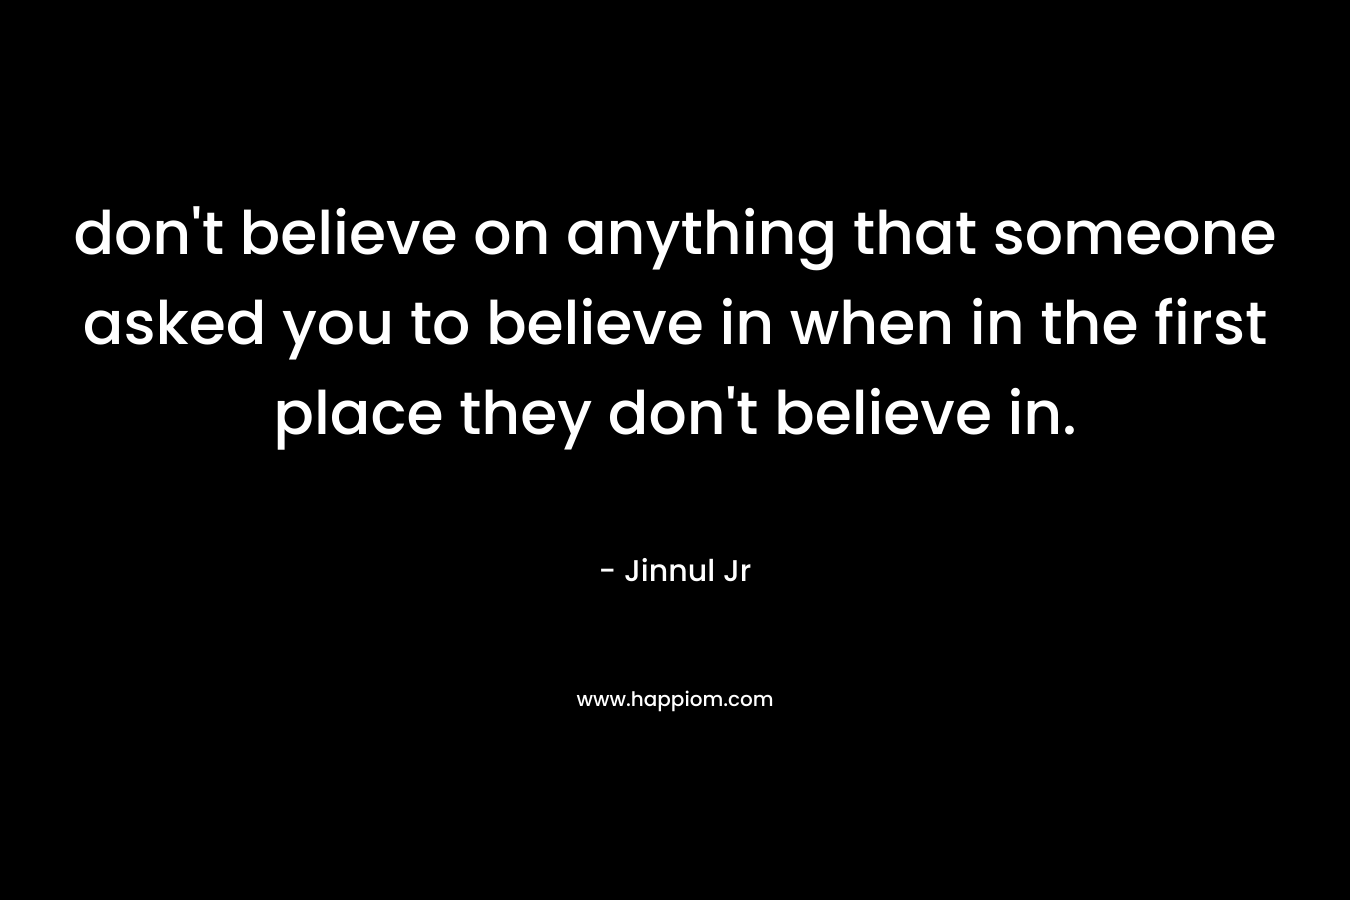 don't believe on anything that someone asked you to believe in when in the first place they don't believe in.